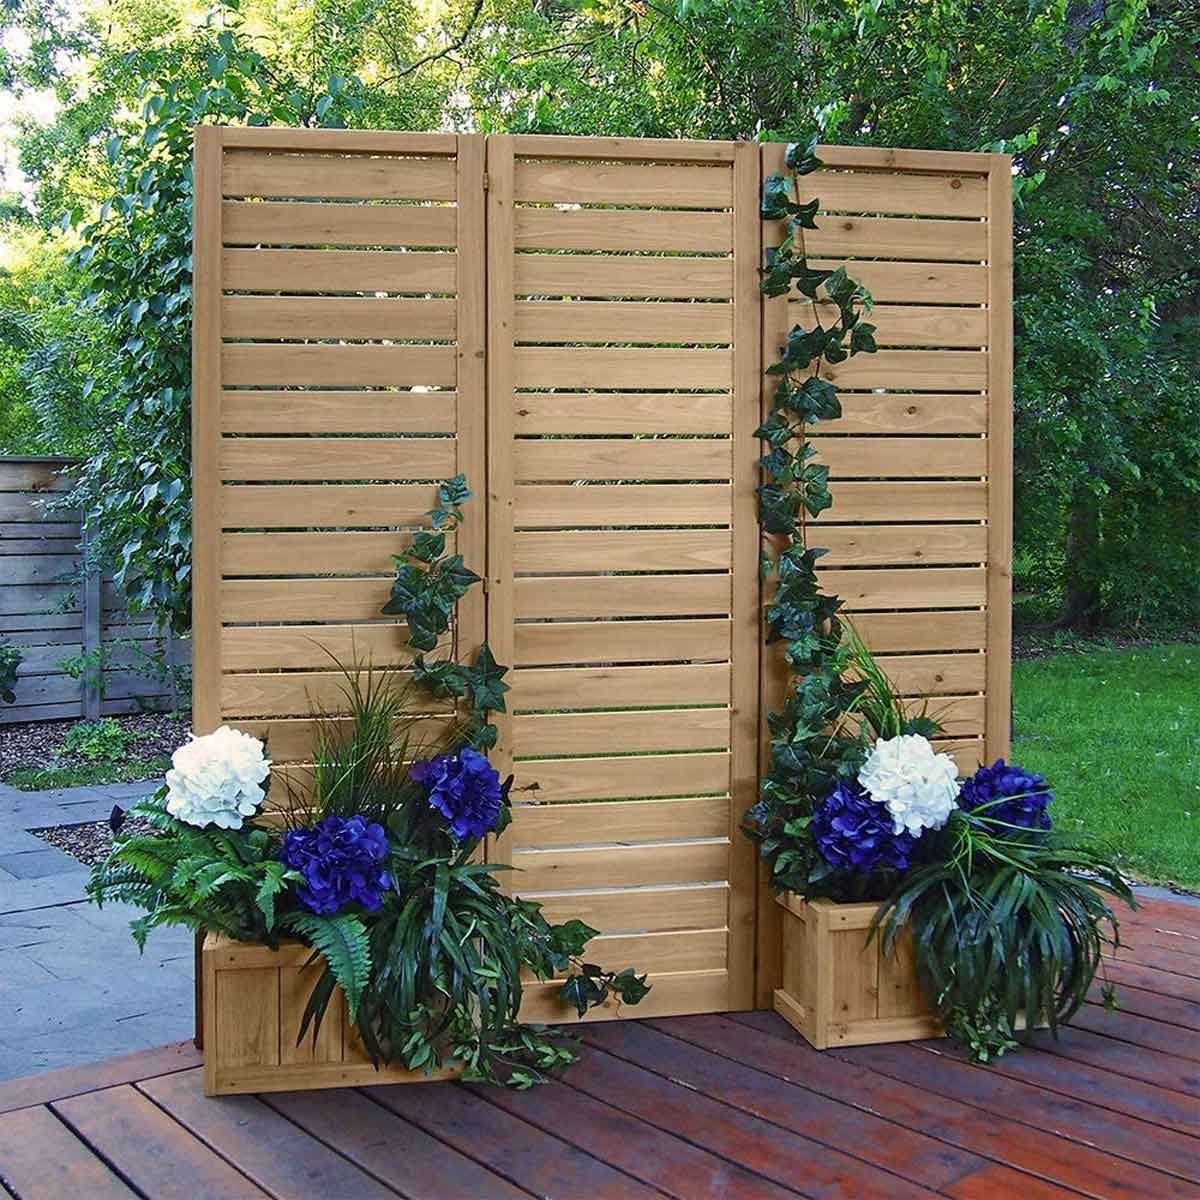 7 Best Outdoor Privacy Screens - Privacy Screen 81gTm9822QL. AC SL1000 